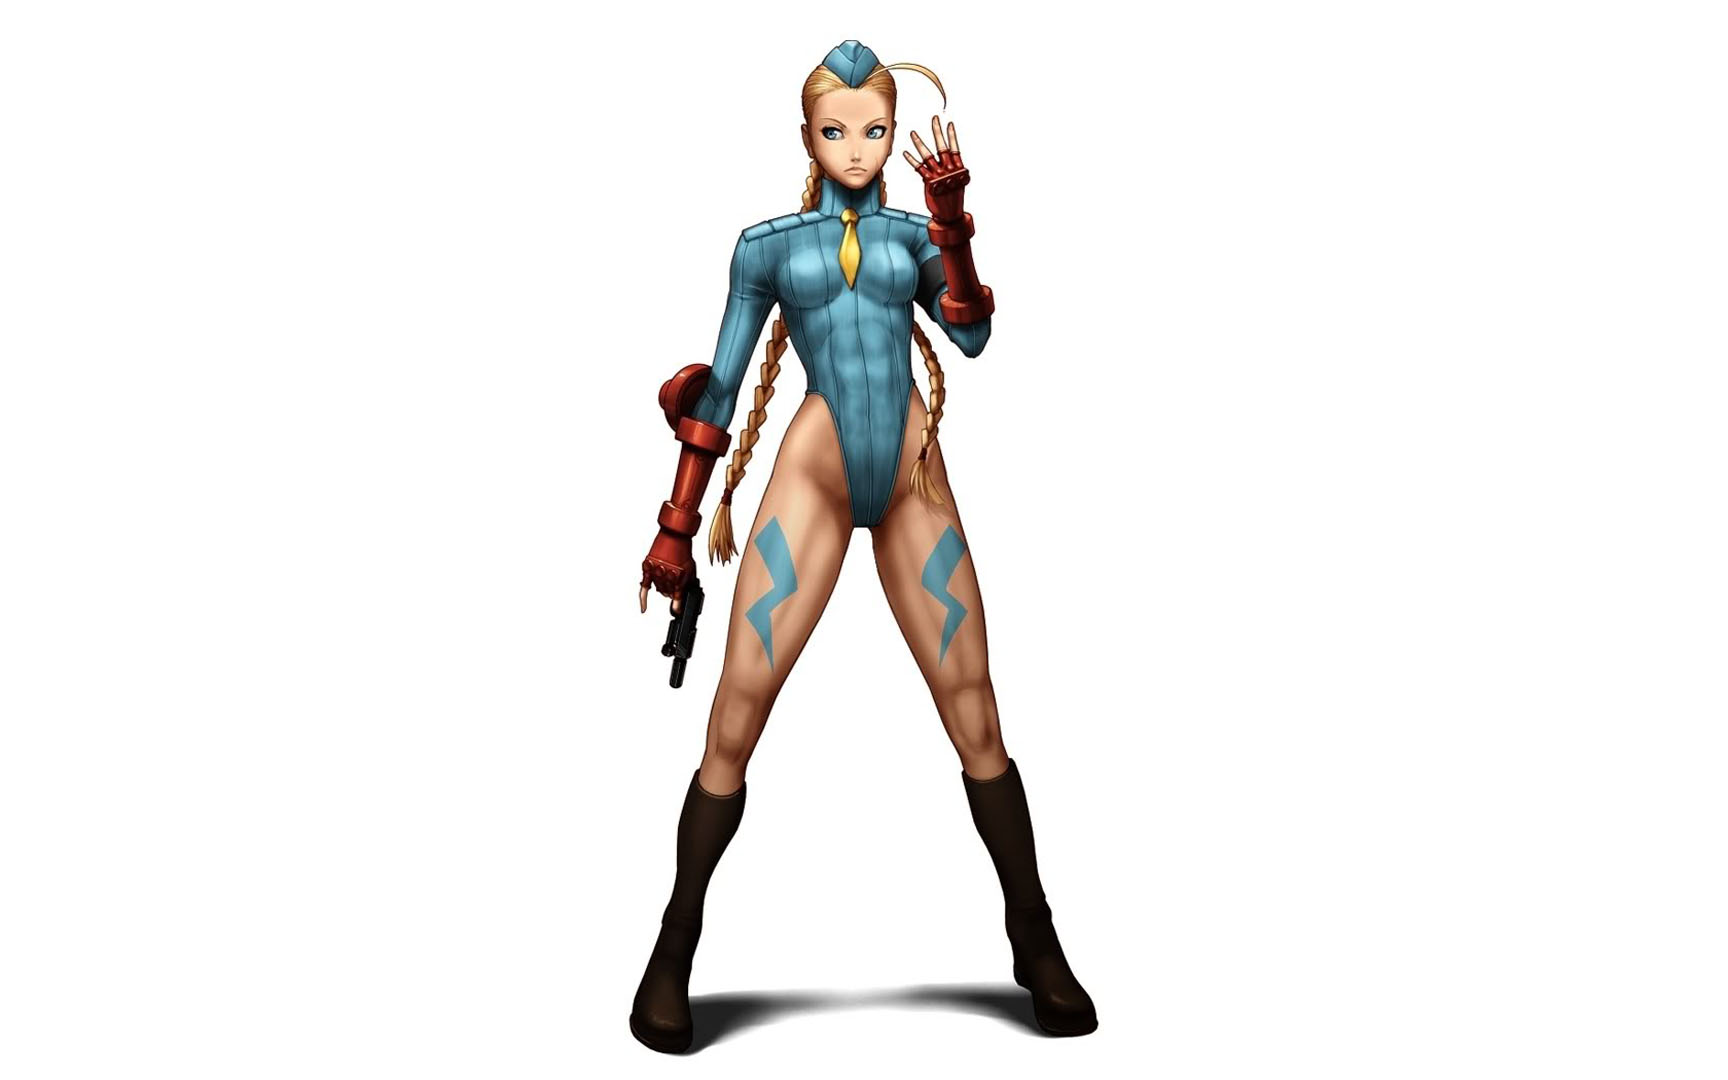 Cammy - Fighting Games Wallpaper Image featuring Street Fighter Iv